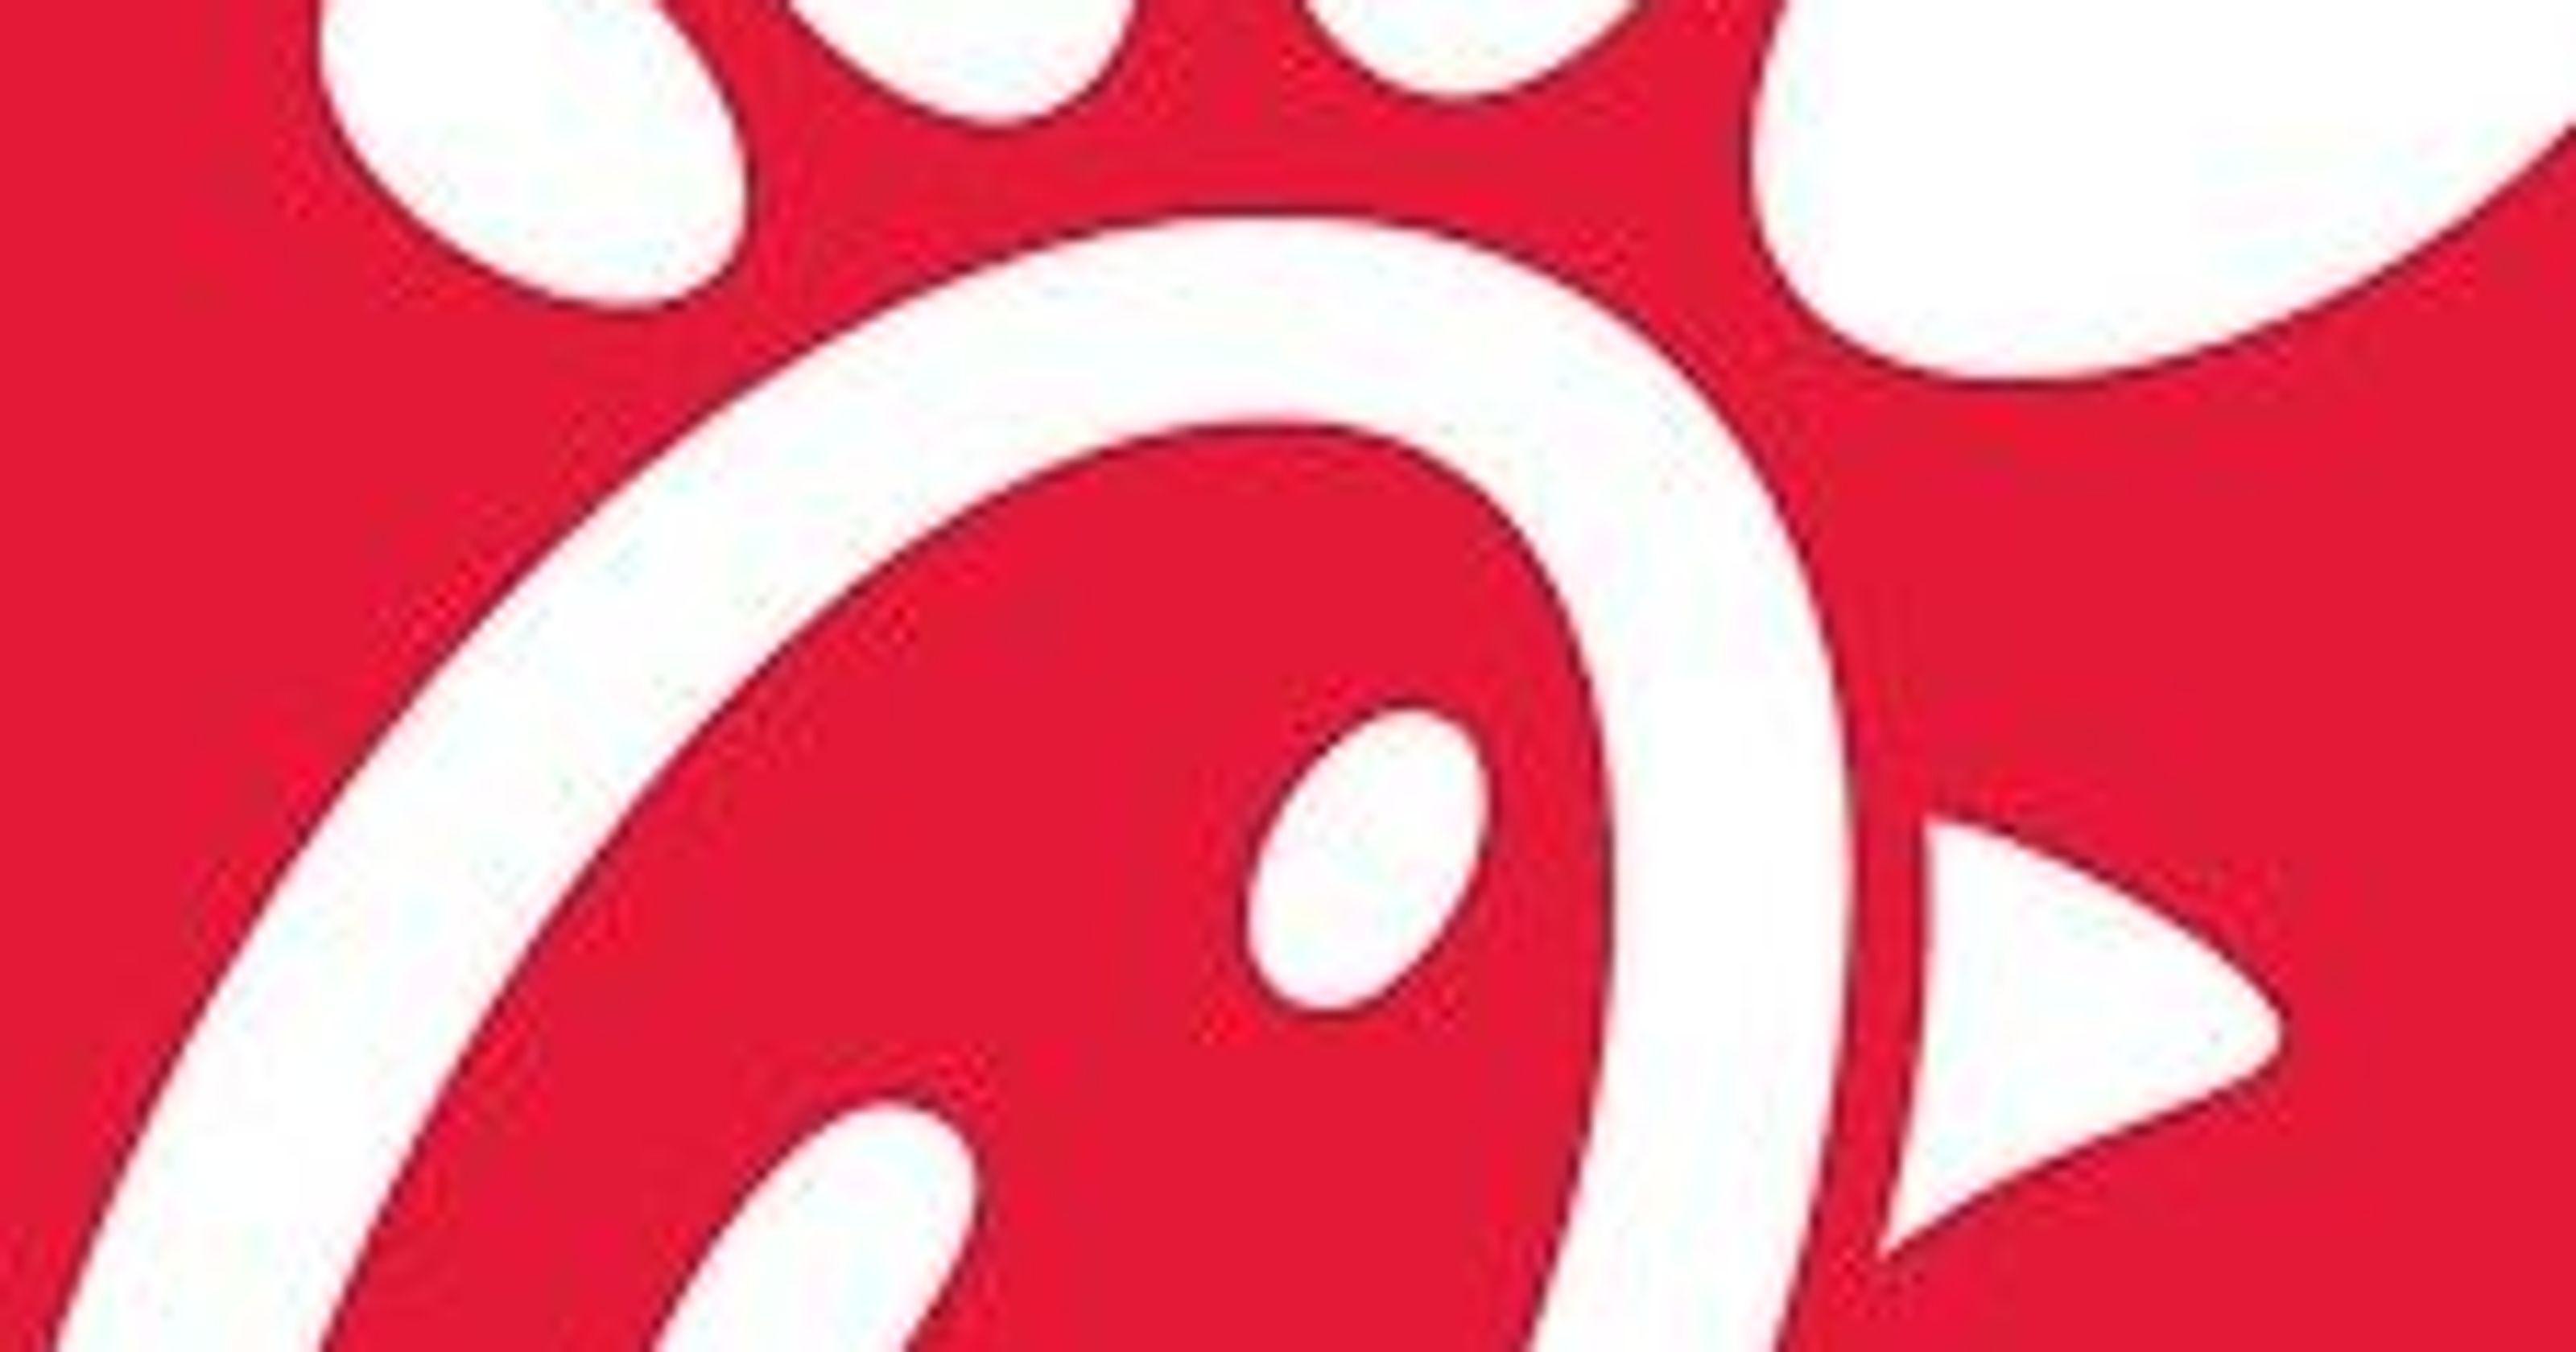 Chick-fil-A Logo - How to get free Chick-fil-A for a year at the new West Chester store